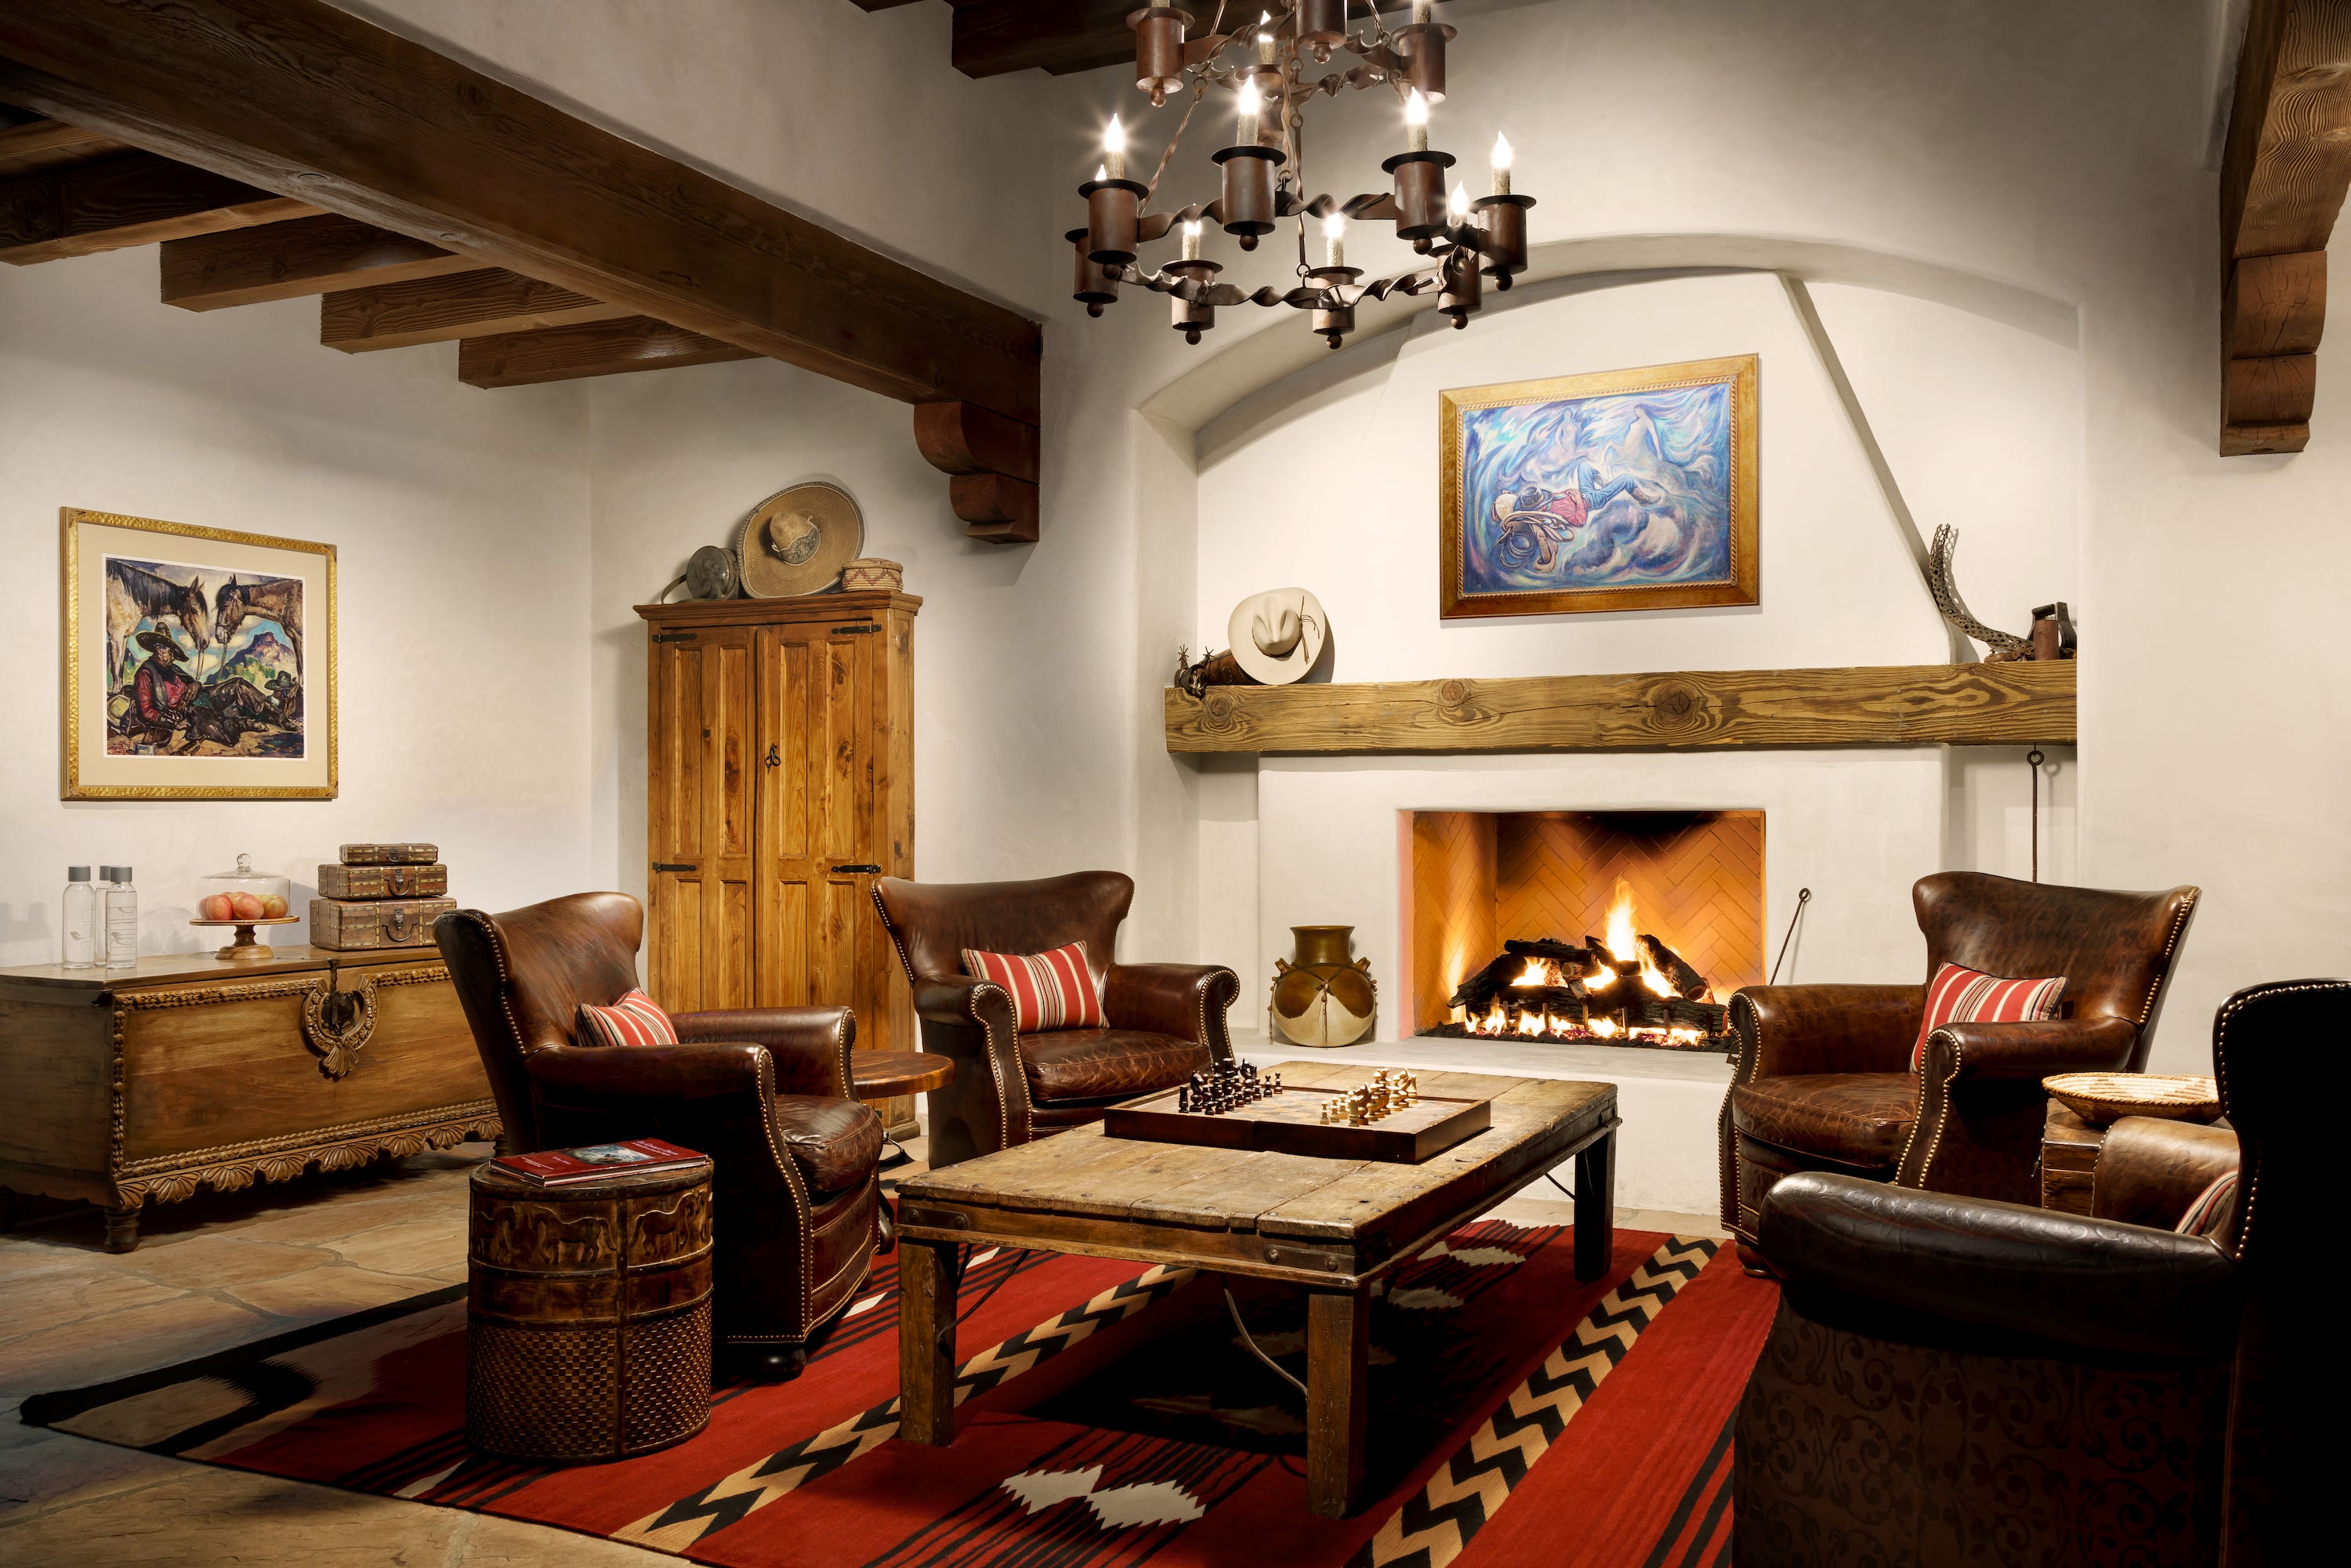 <p>Unlike the Phoenician, there's nothing modern about the Hermosa Inn's interior design.</p><p>Instead, it transports visitors to the early 20th-century West from the moment they check-in, with adobe bricks, wooden beams, and high-quality rustic furniture. The lobby and rooms showcase some of Megargee's artwork, too.</p>